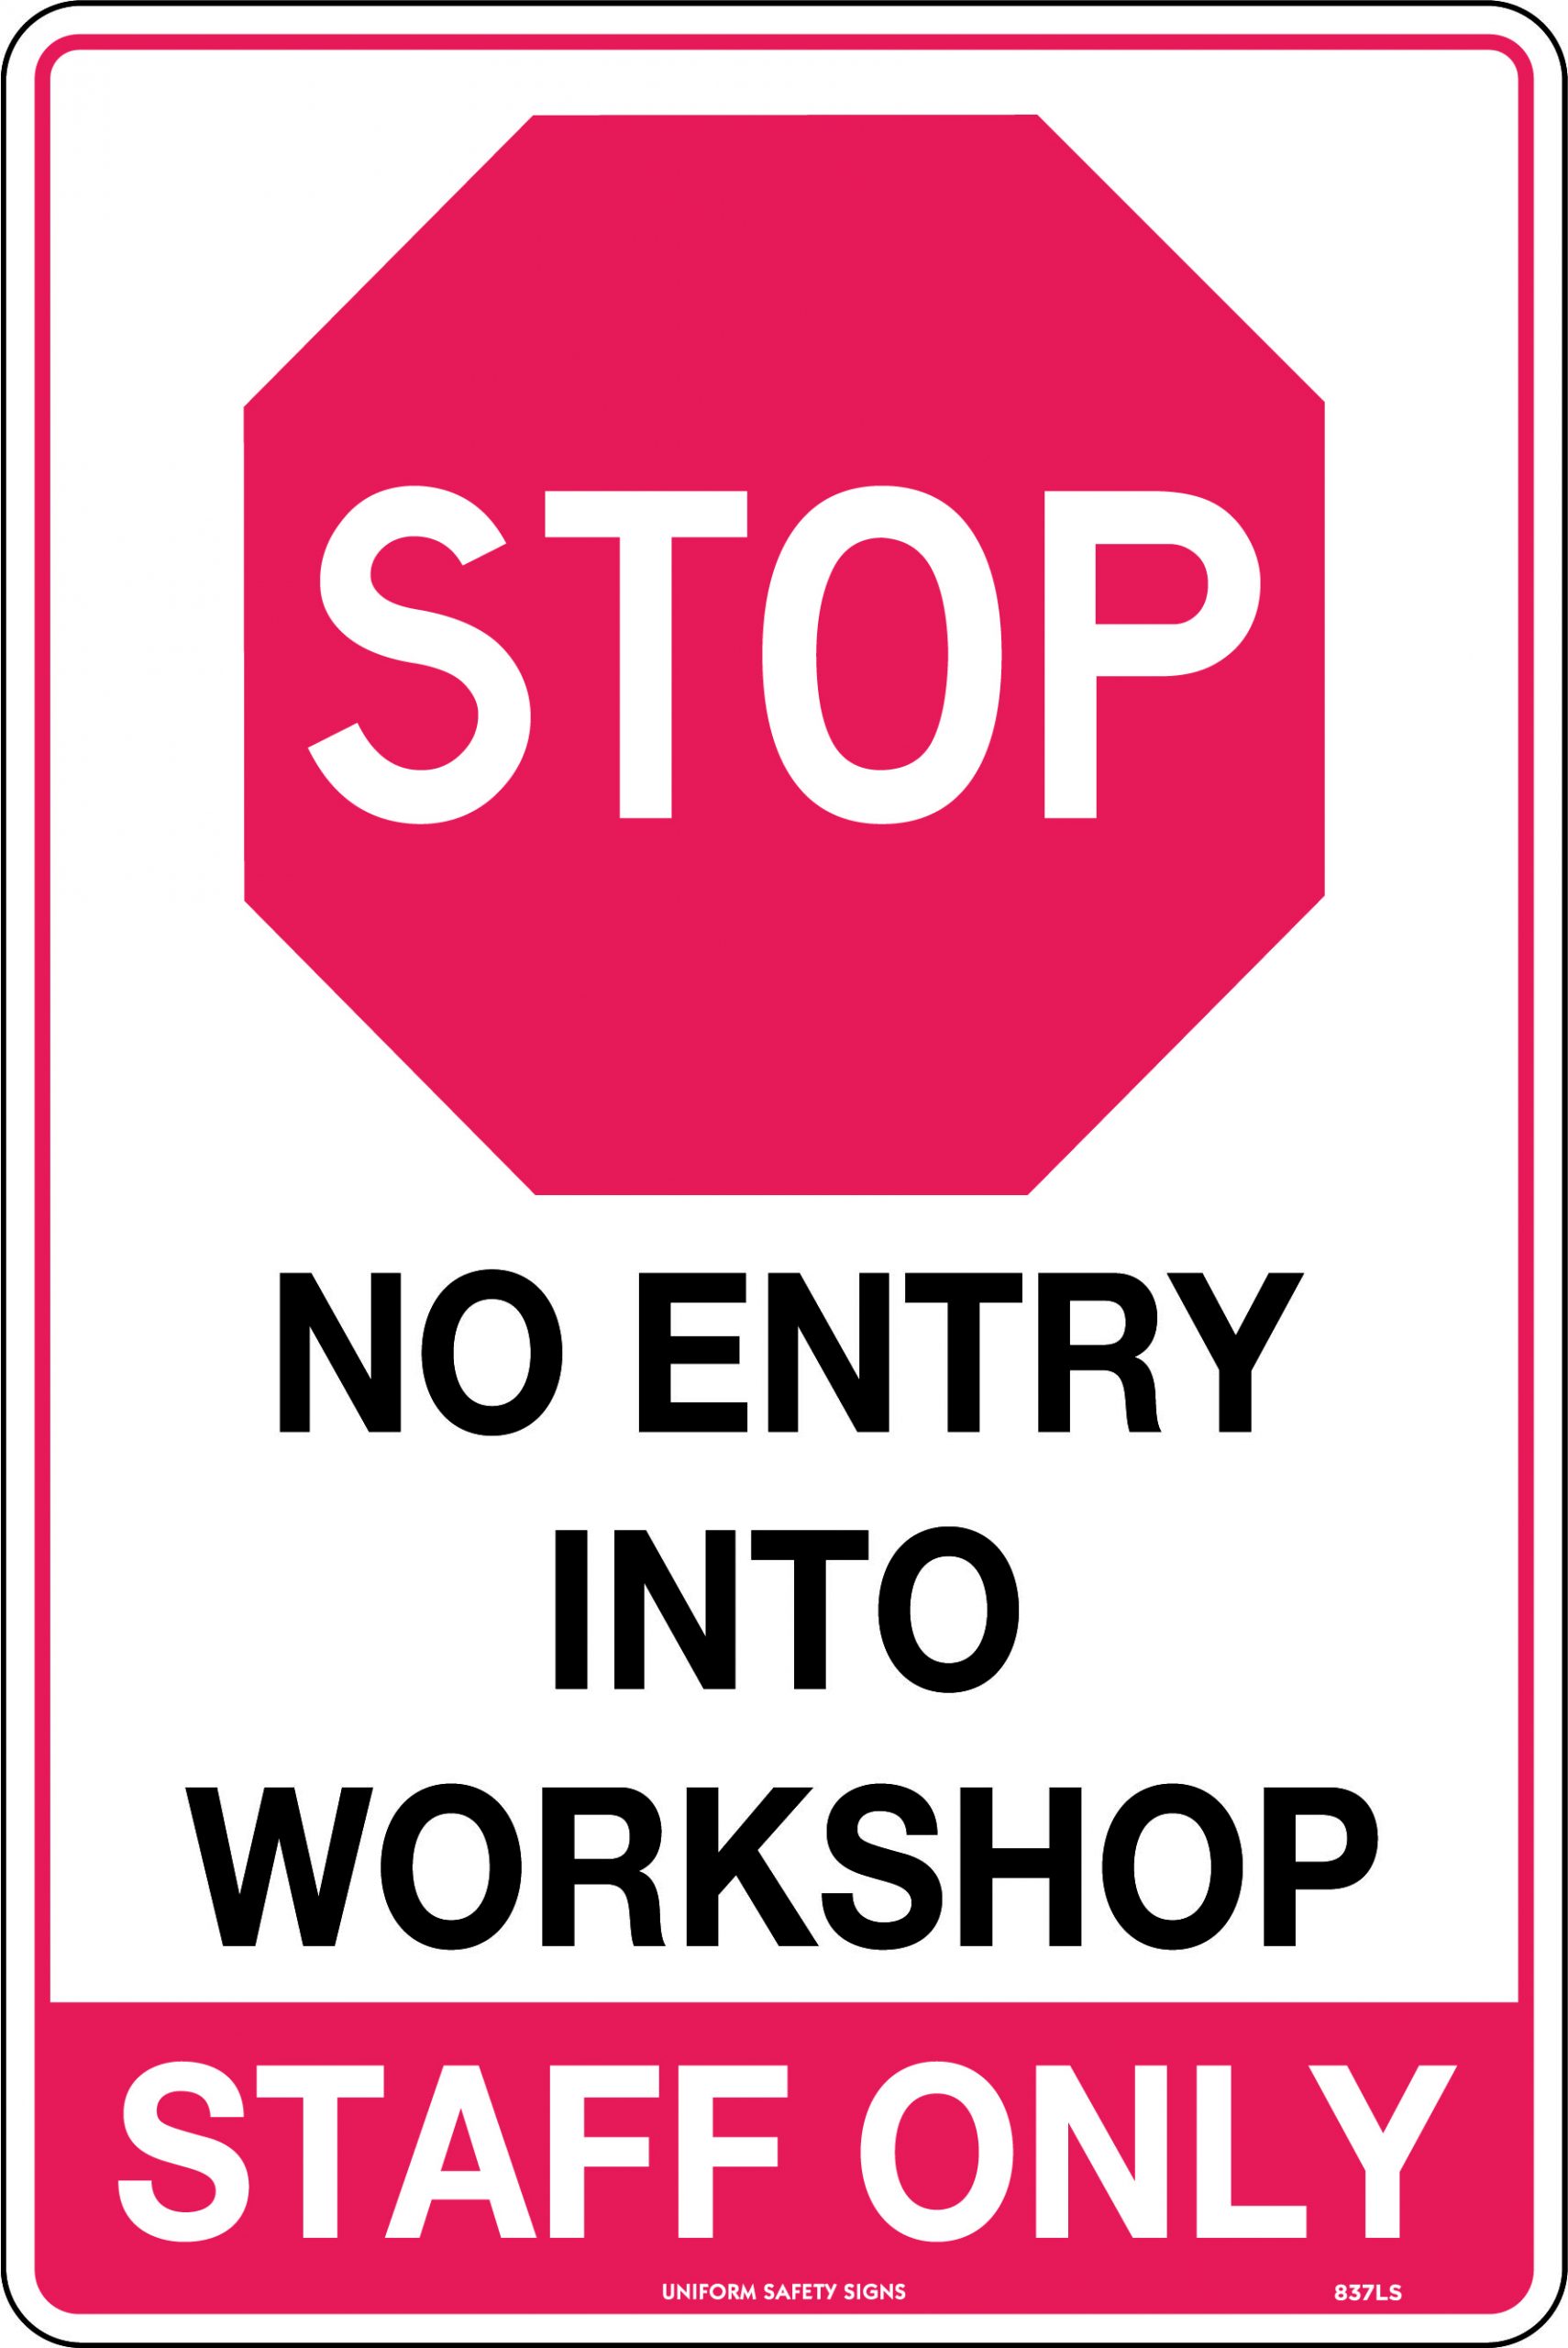 SIGN 600 X 450MM METAL STOP NO ENTRY INTO WORKSHOP STAFF ONLY